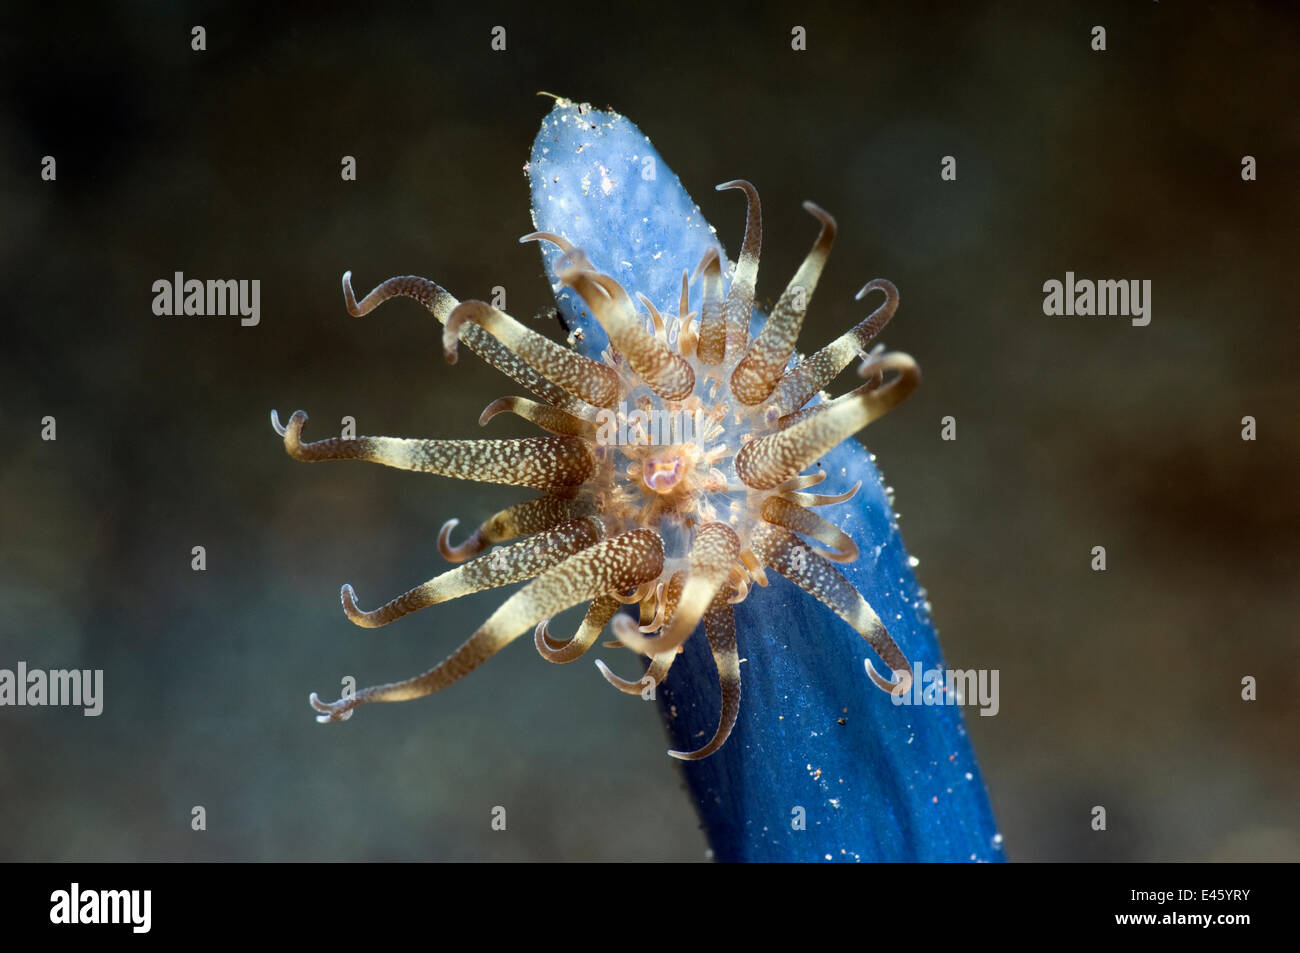 Swimming anemone (Boloceroides mcmurrichi) on Blue sea squirt / Tunicate, Rinca, Komodo National Park, Indonesia, October Stock Photo